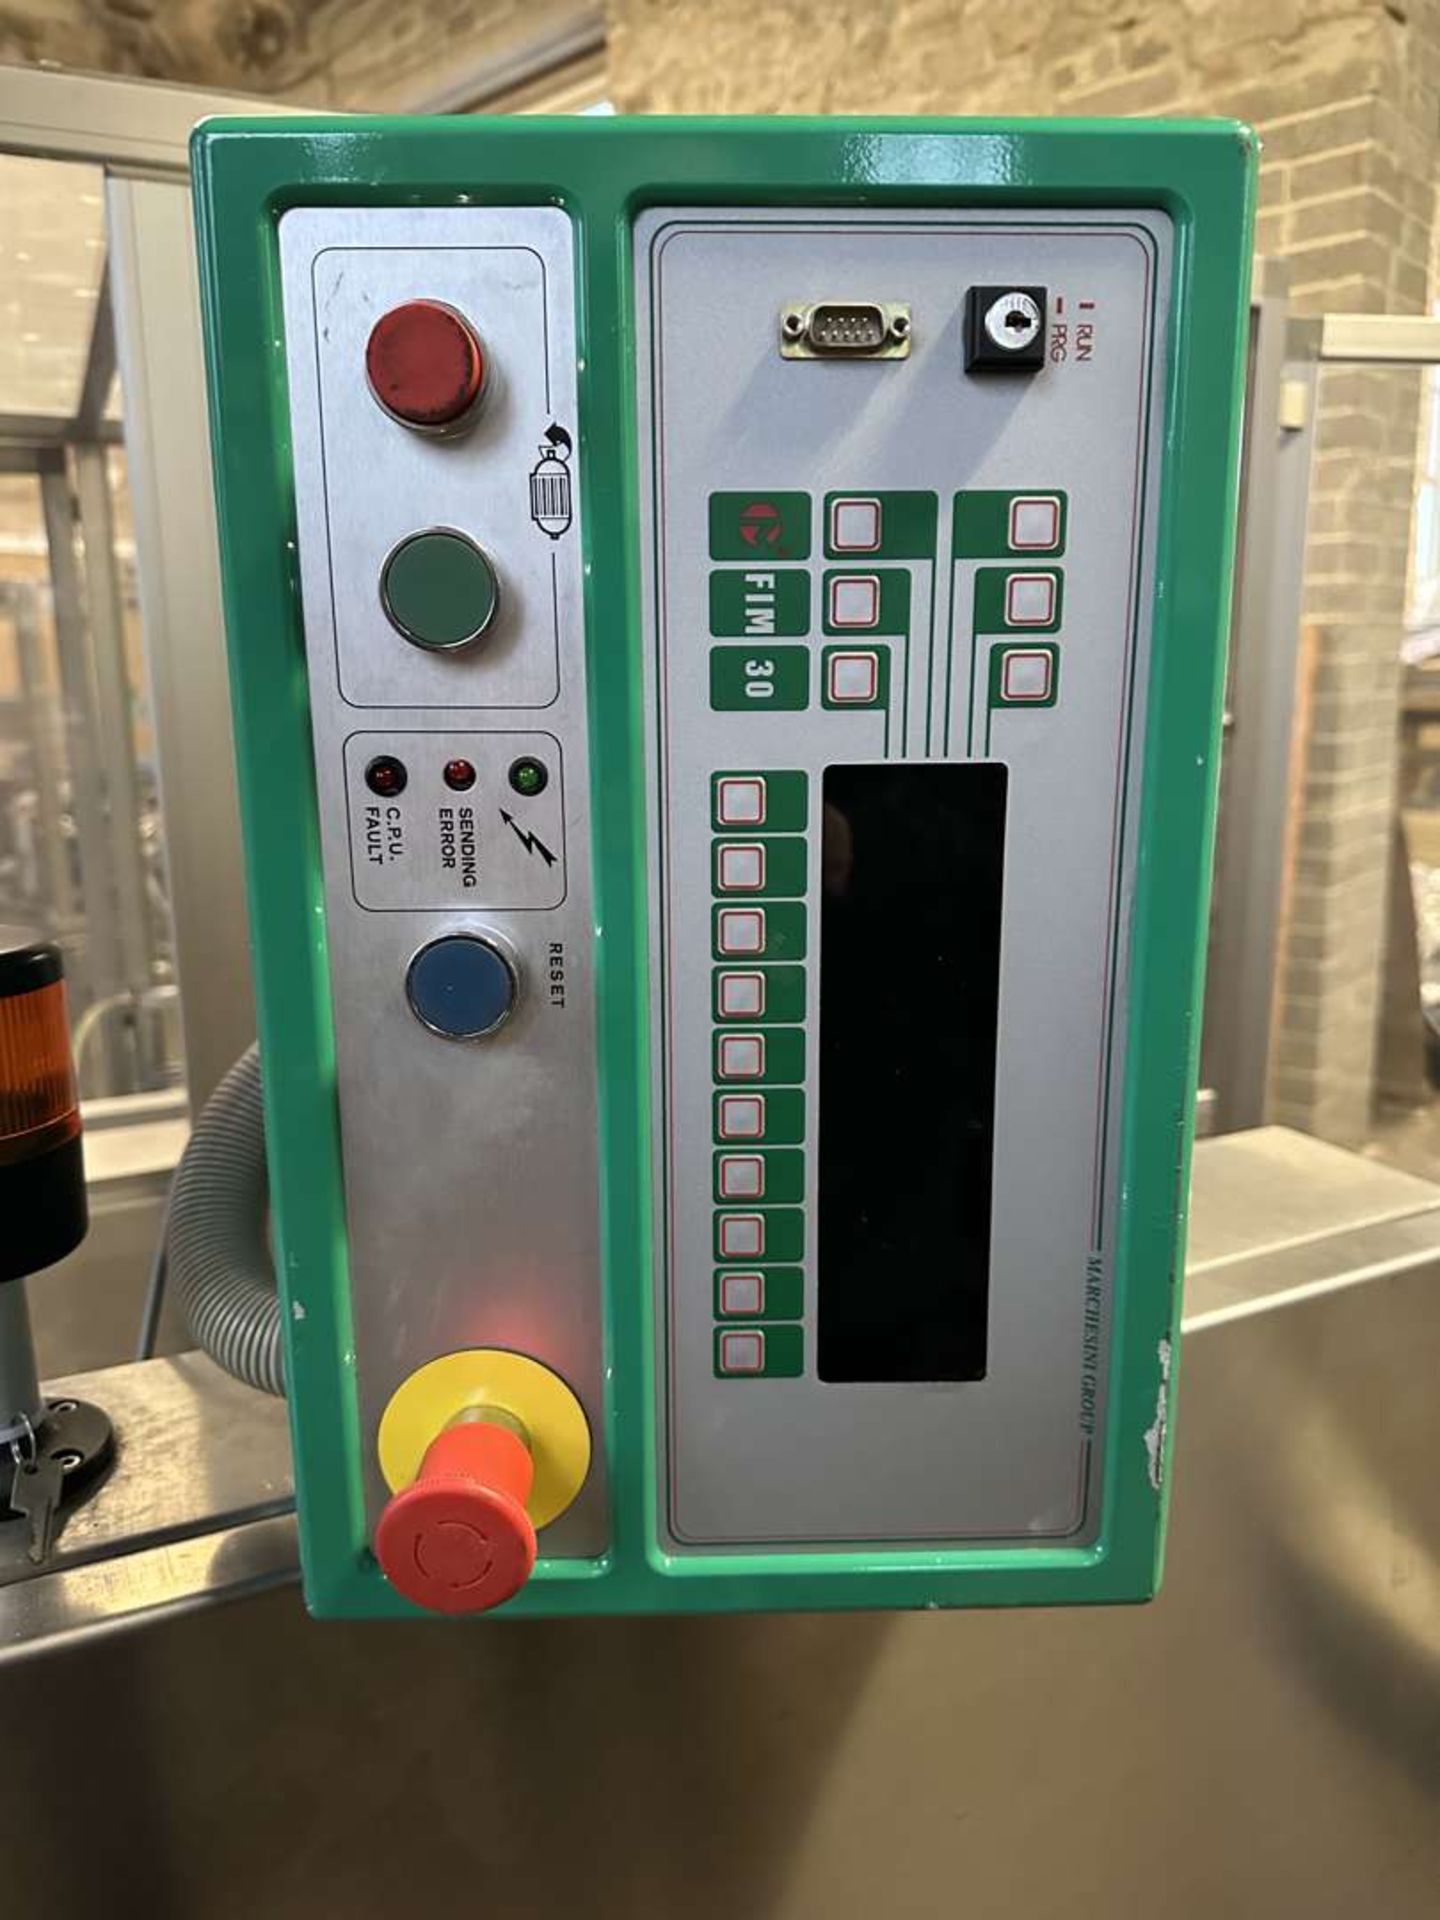 Marchesini LAC 3 Spray Tester - Image 5 of 10